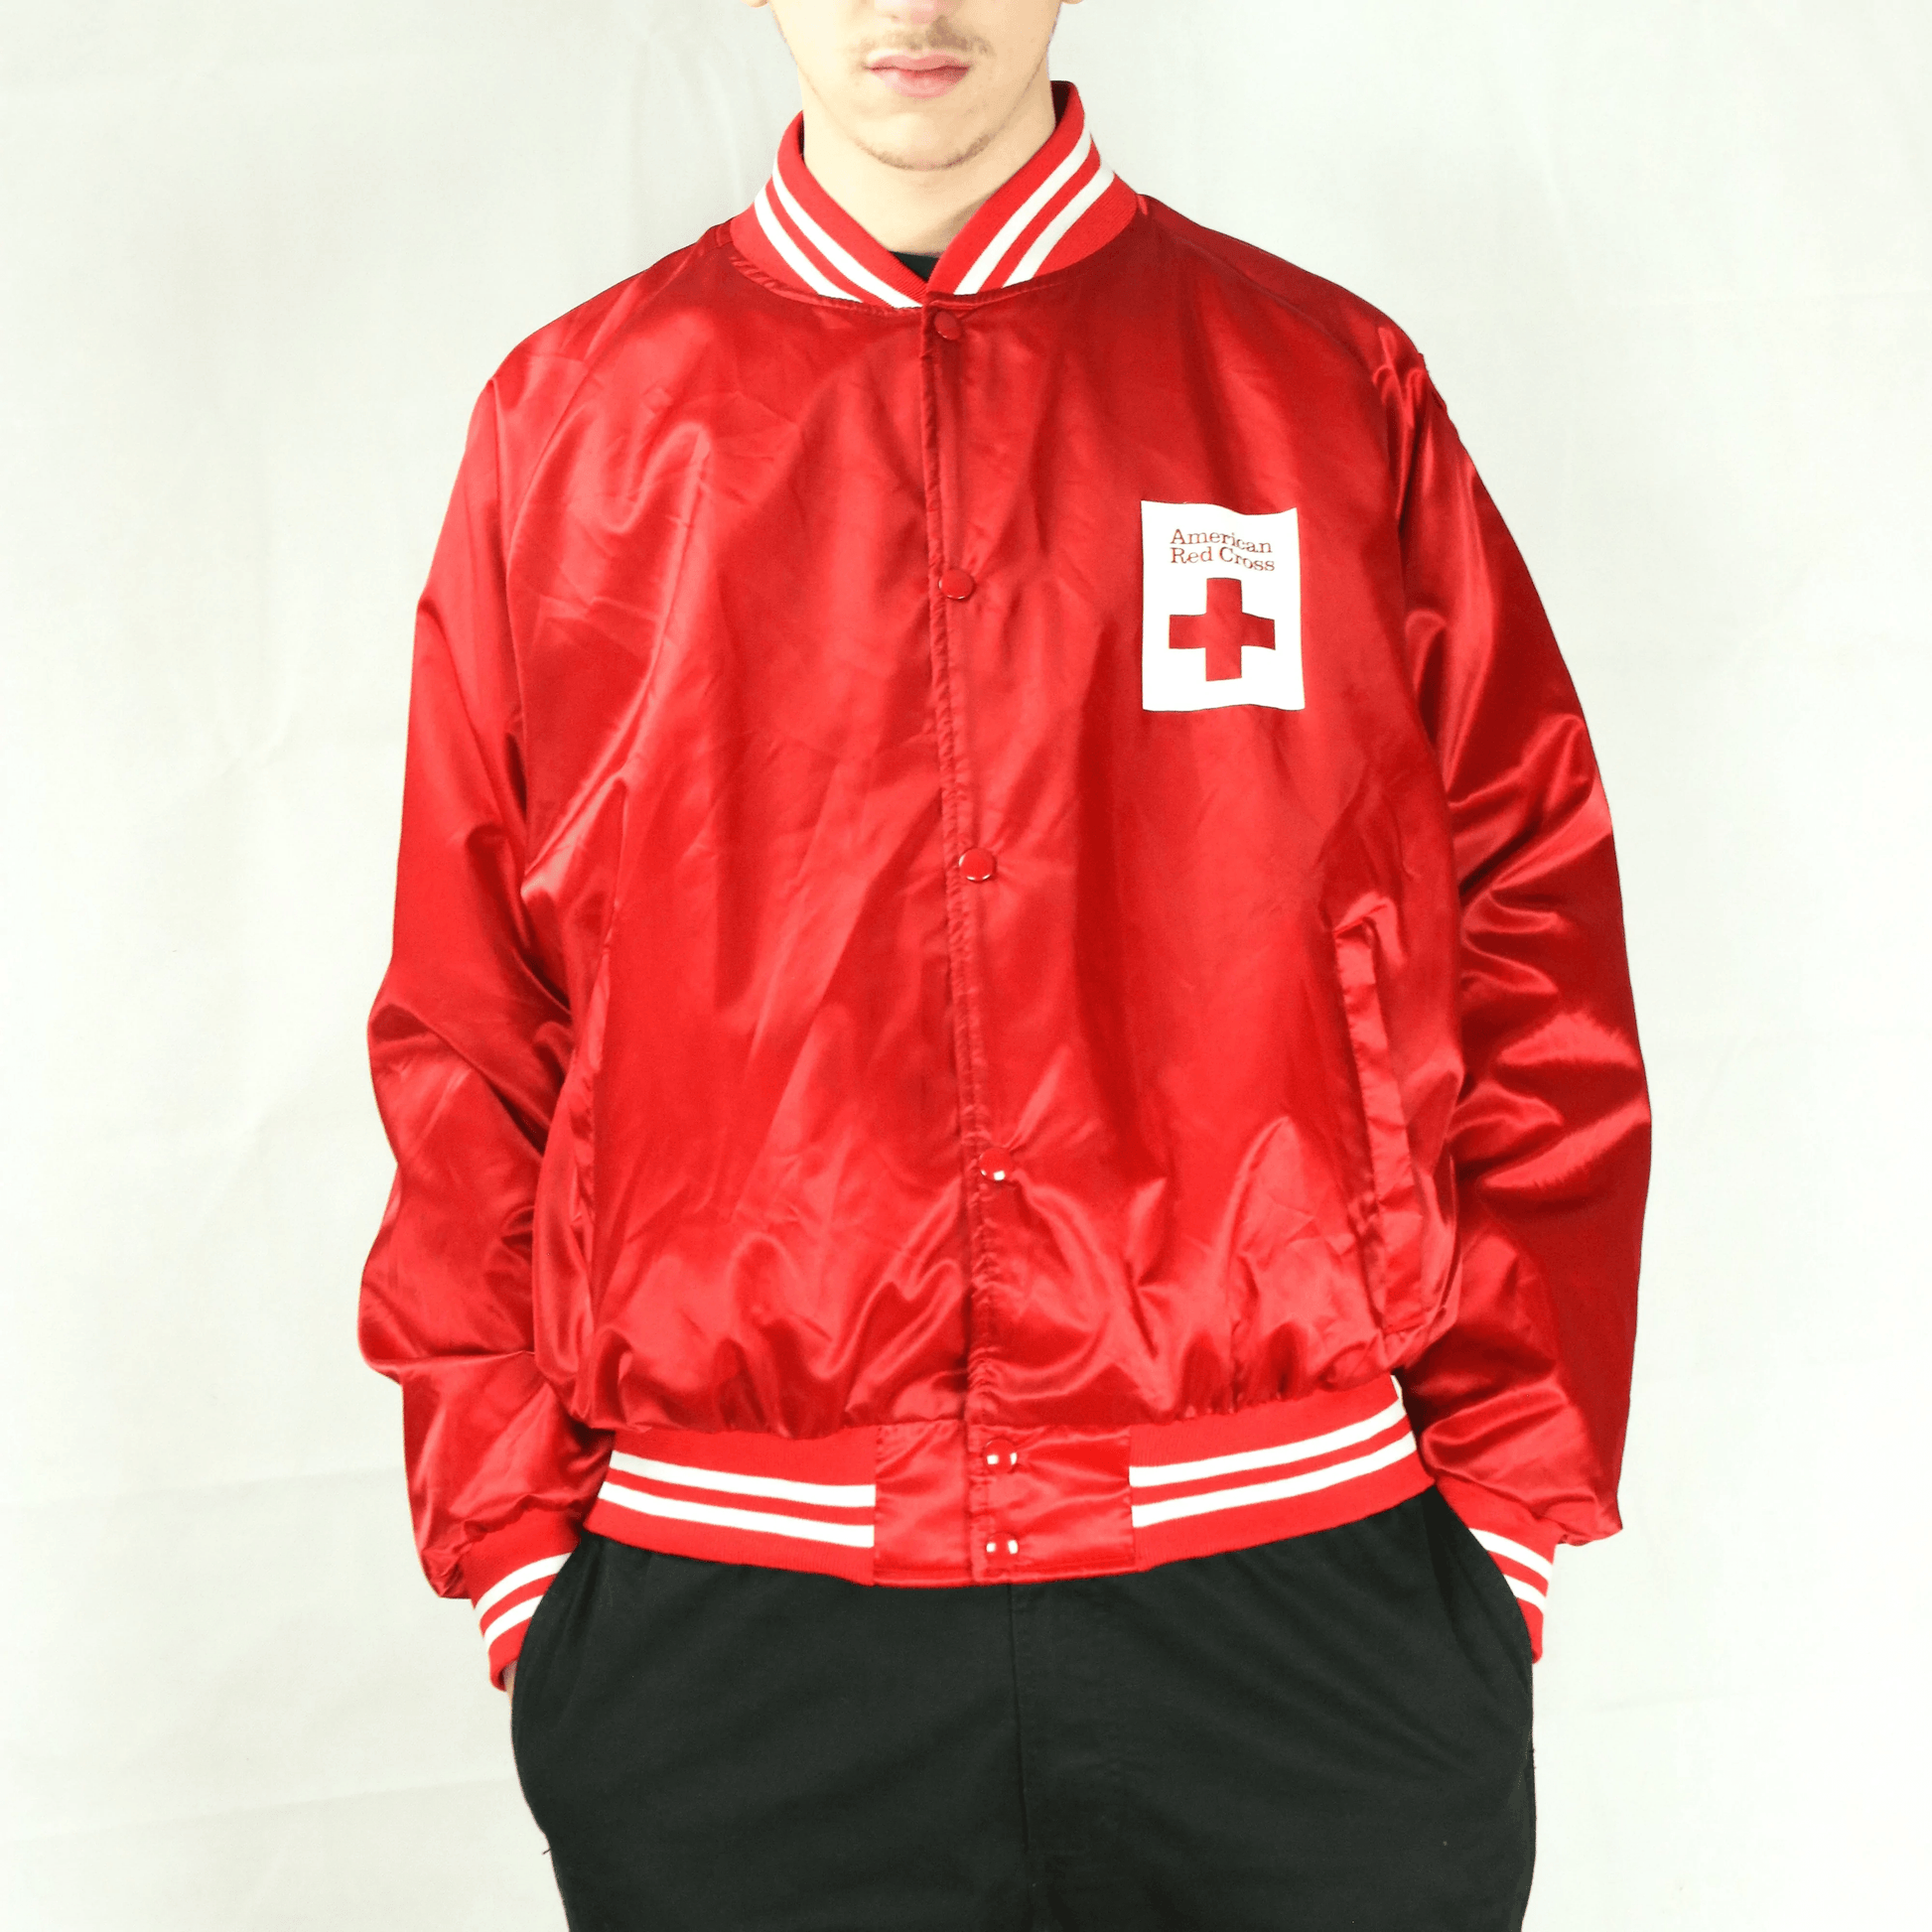 AMERICAN RED CROSS JACKET (M) - Known Source